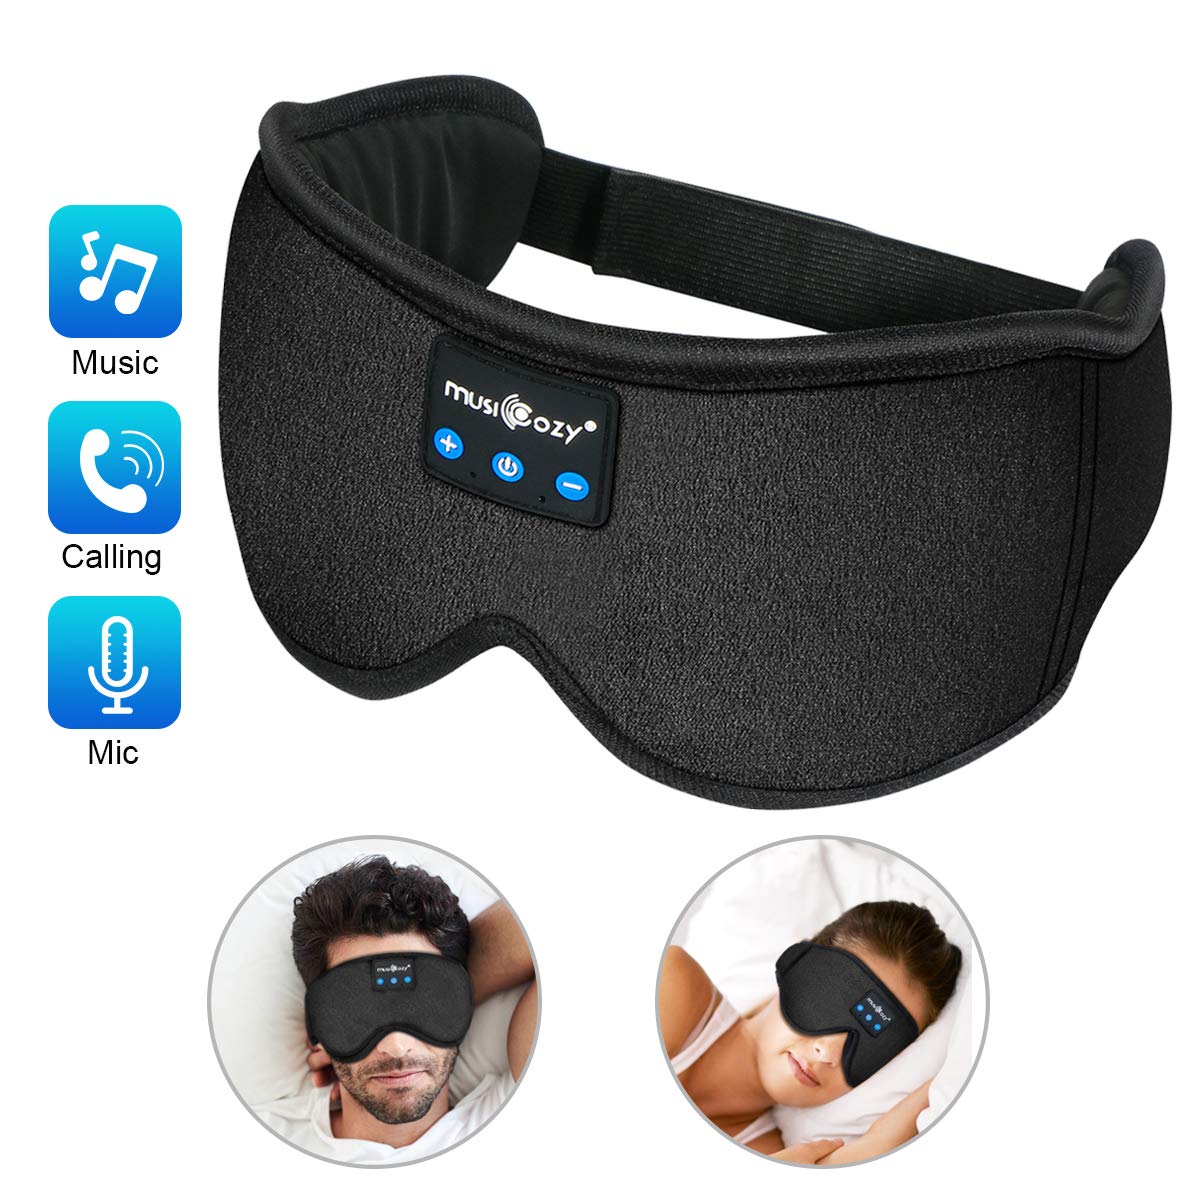 Sleep Headphones Bluetooth Wireless Sleeping Eye Mask, Office Travel Unisex Valentine's Gifts Men Women Who Have Everything Top Cool Tech Gadgets Unique Mom Dad Her Him Adults Teen Boys Girls